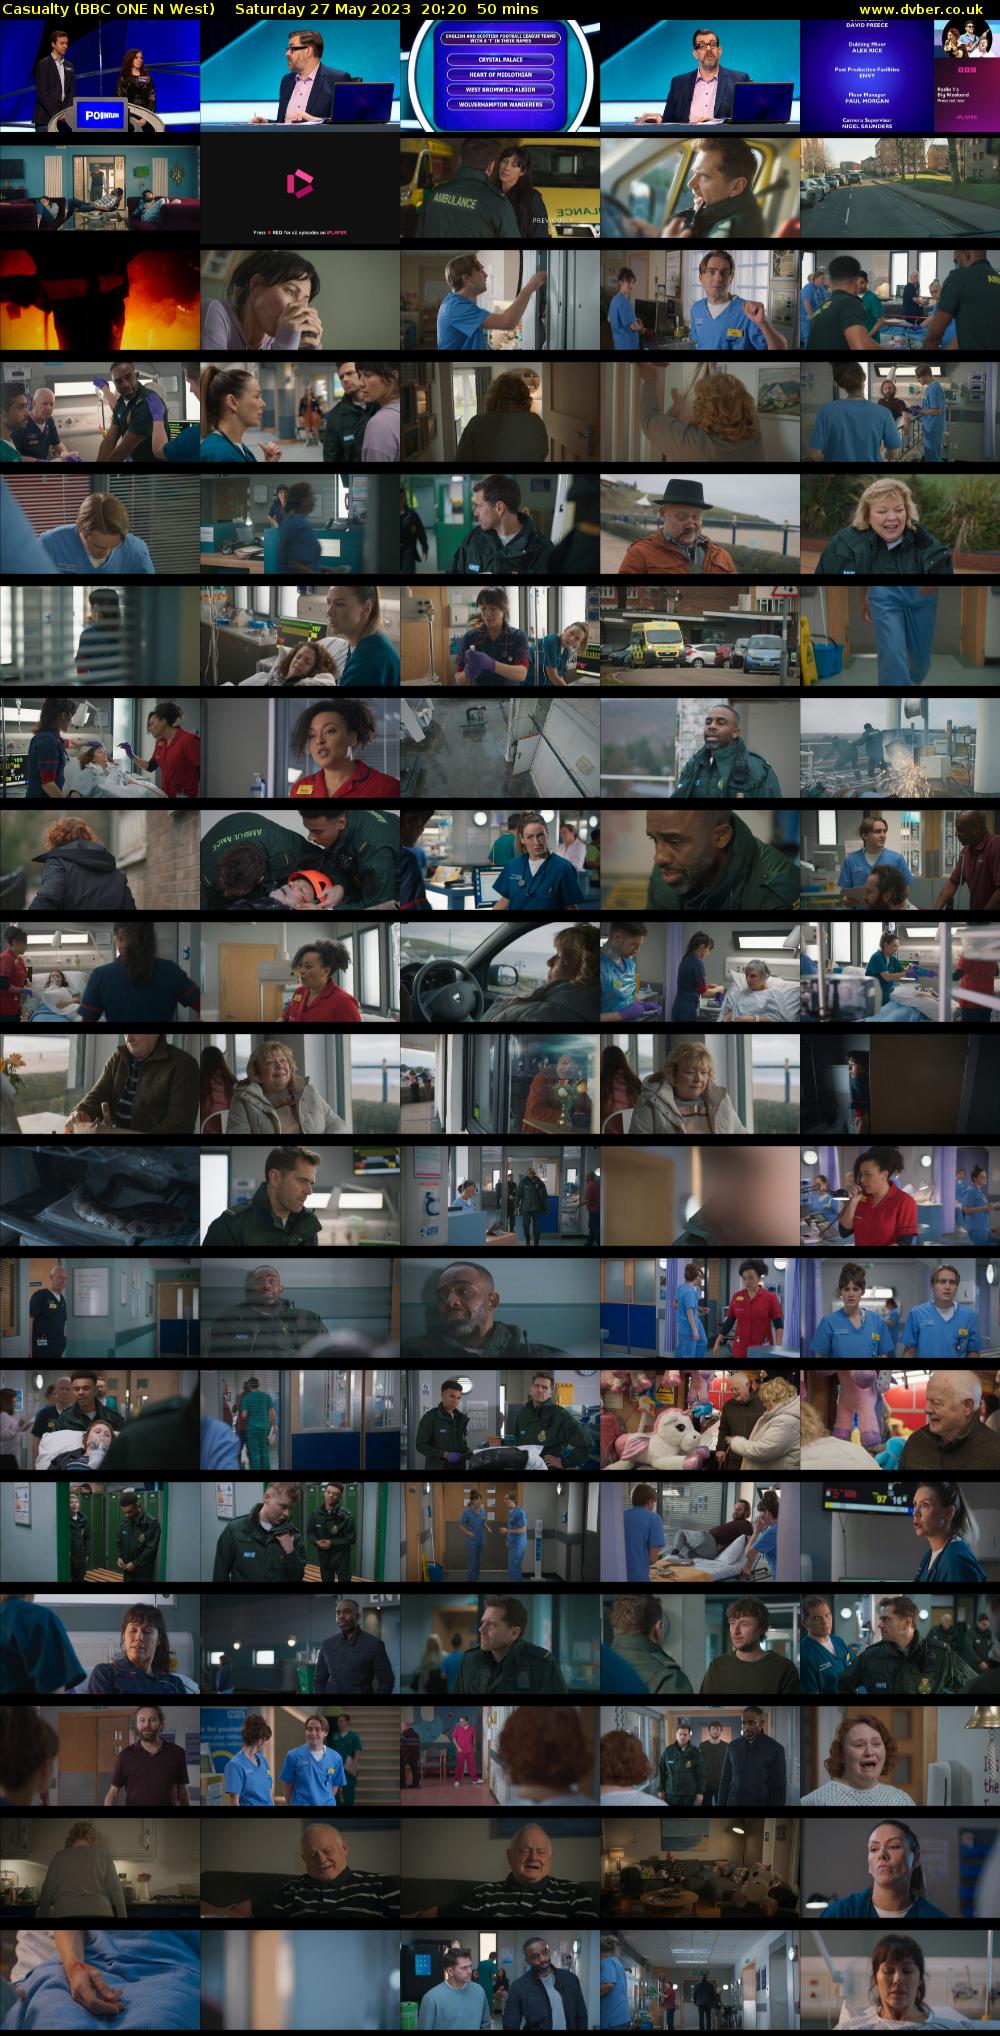 Casualty (BBC ONE N West) Saturday 27 May 2023 20:20 - 21:10